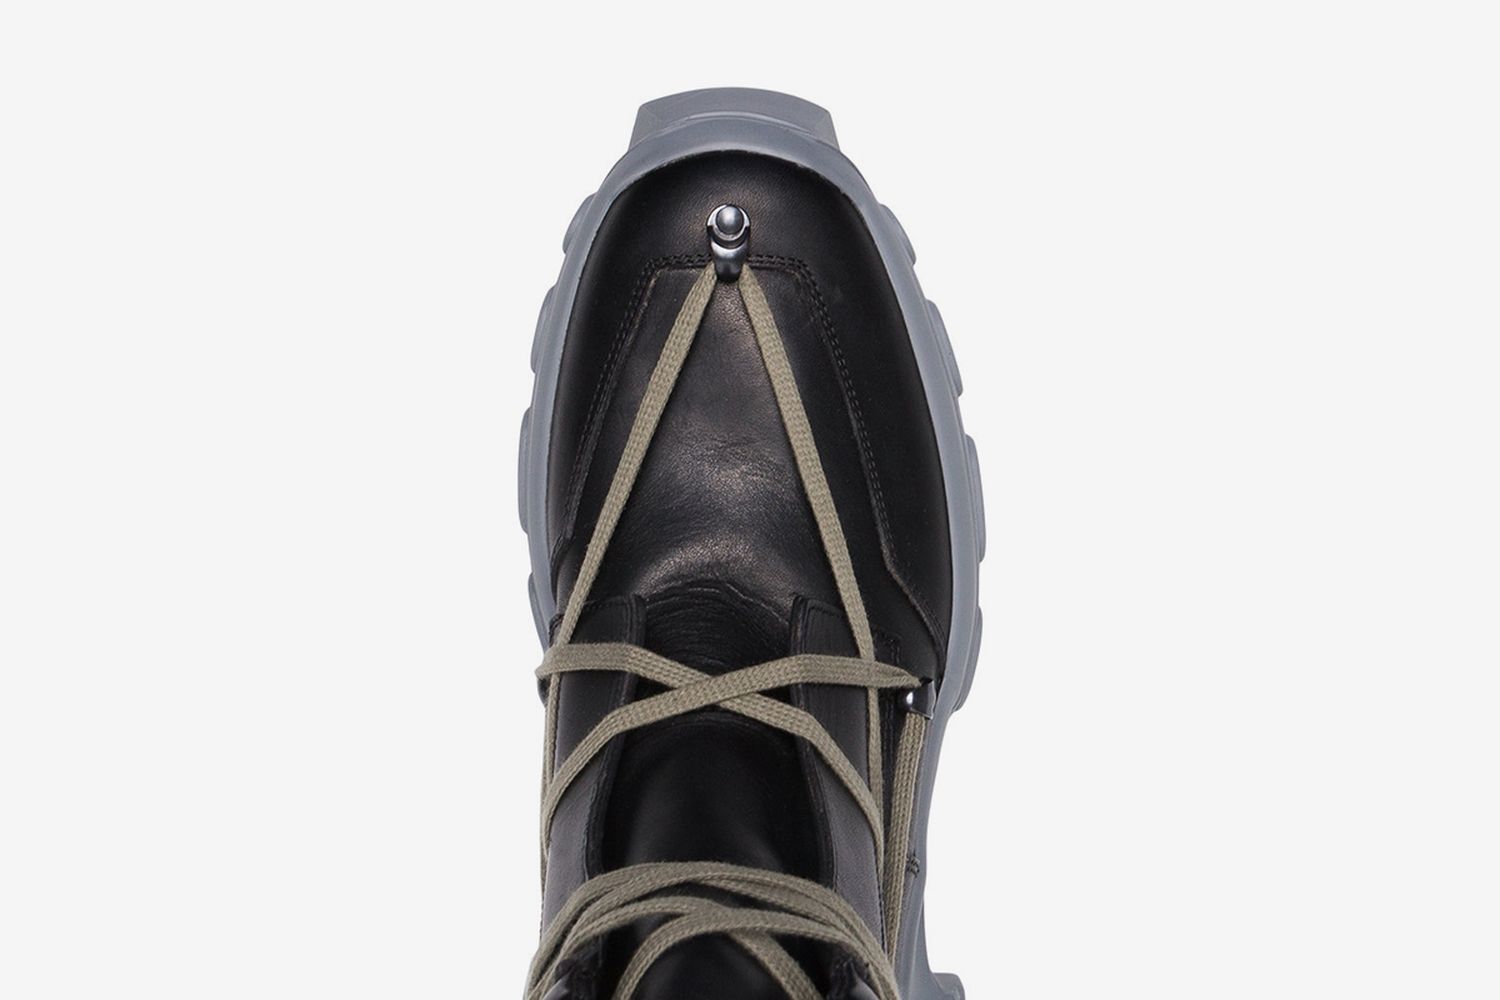 Lace-Up Hiking Boot